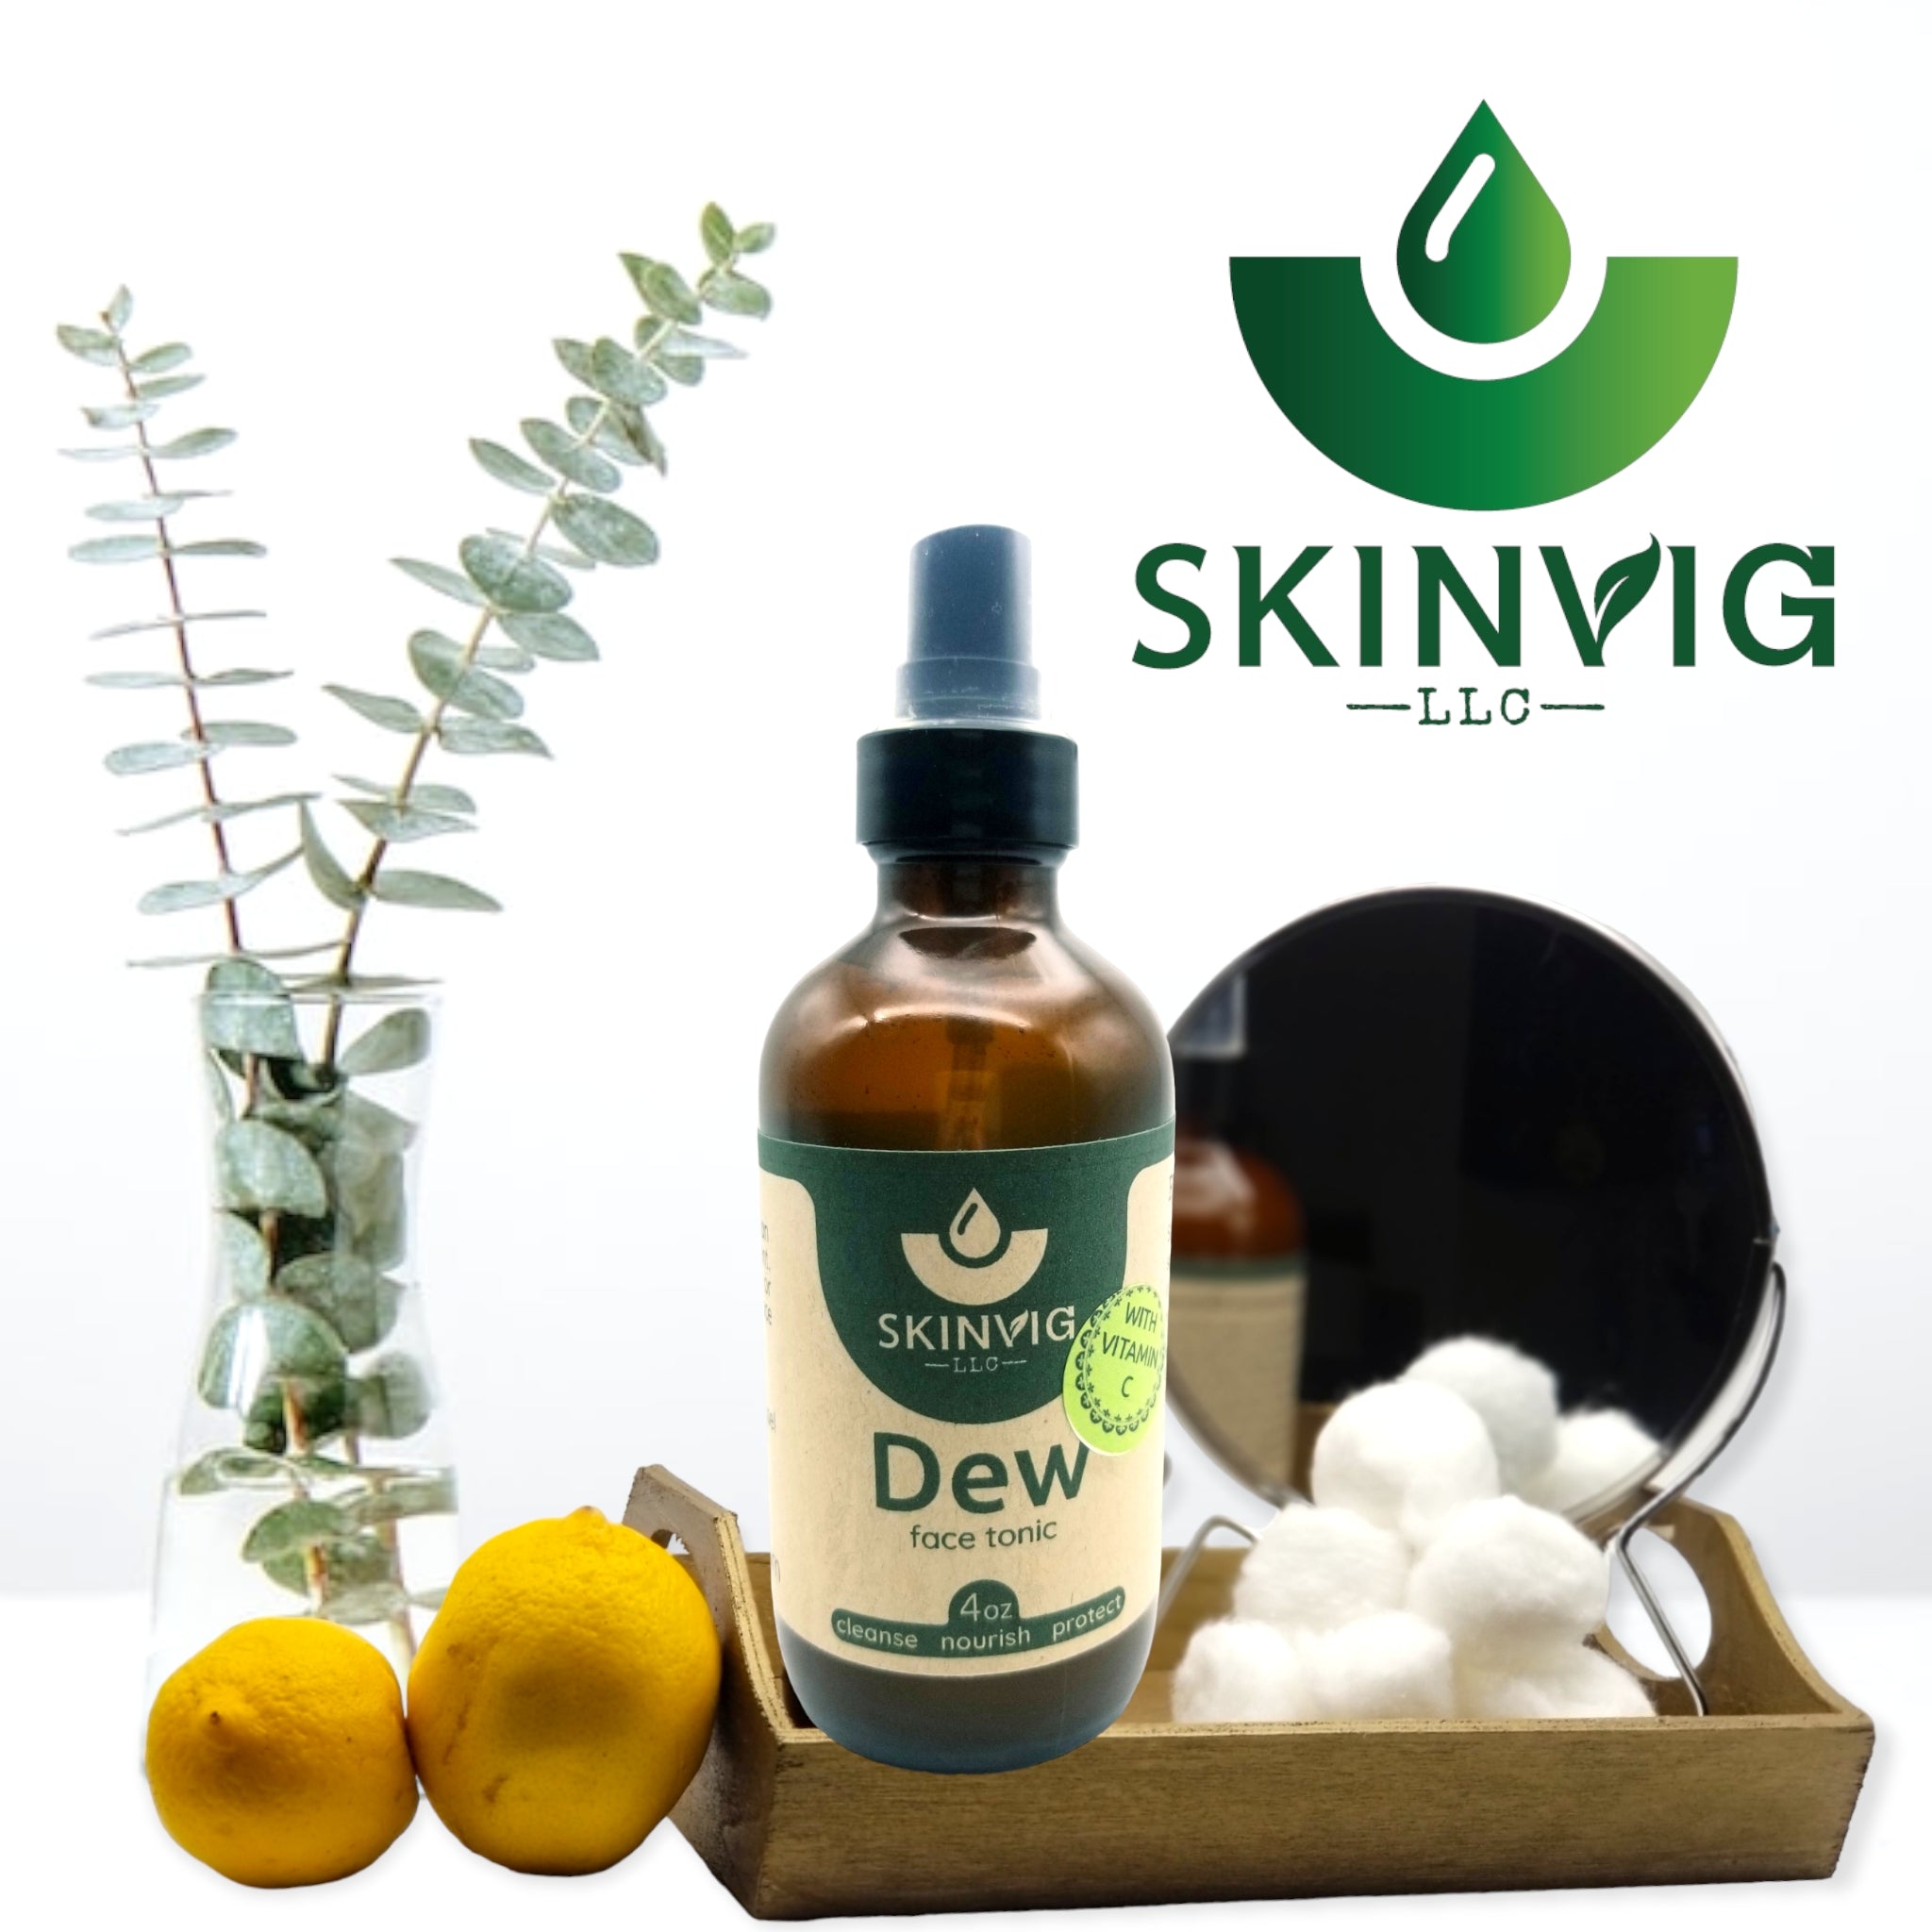 Dew Face Tonic with Vitamin C